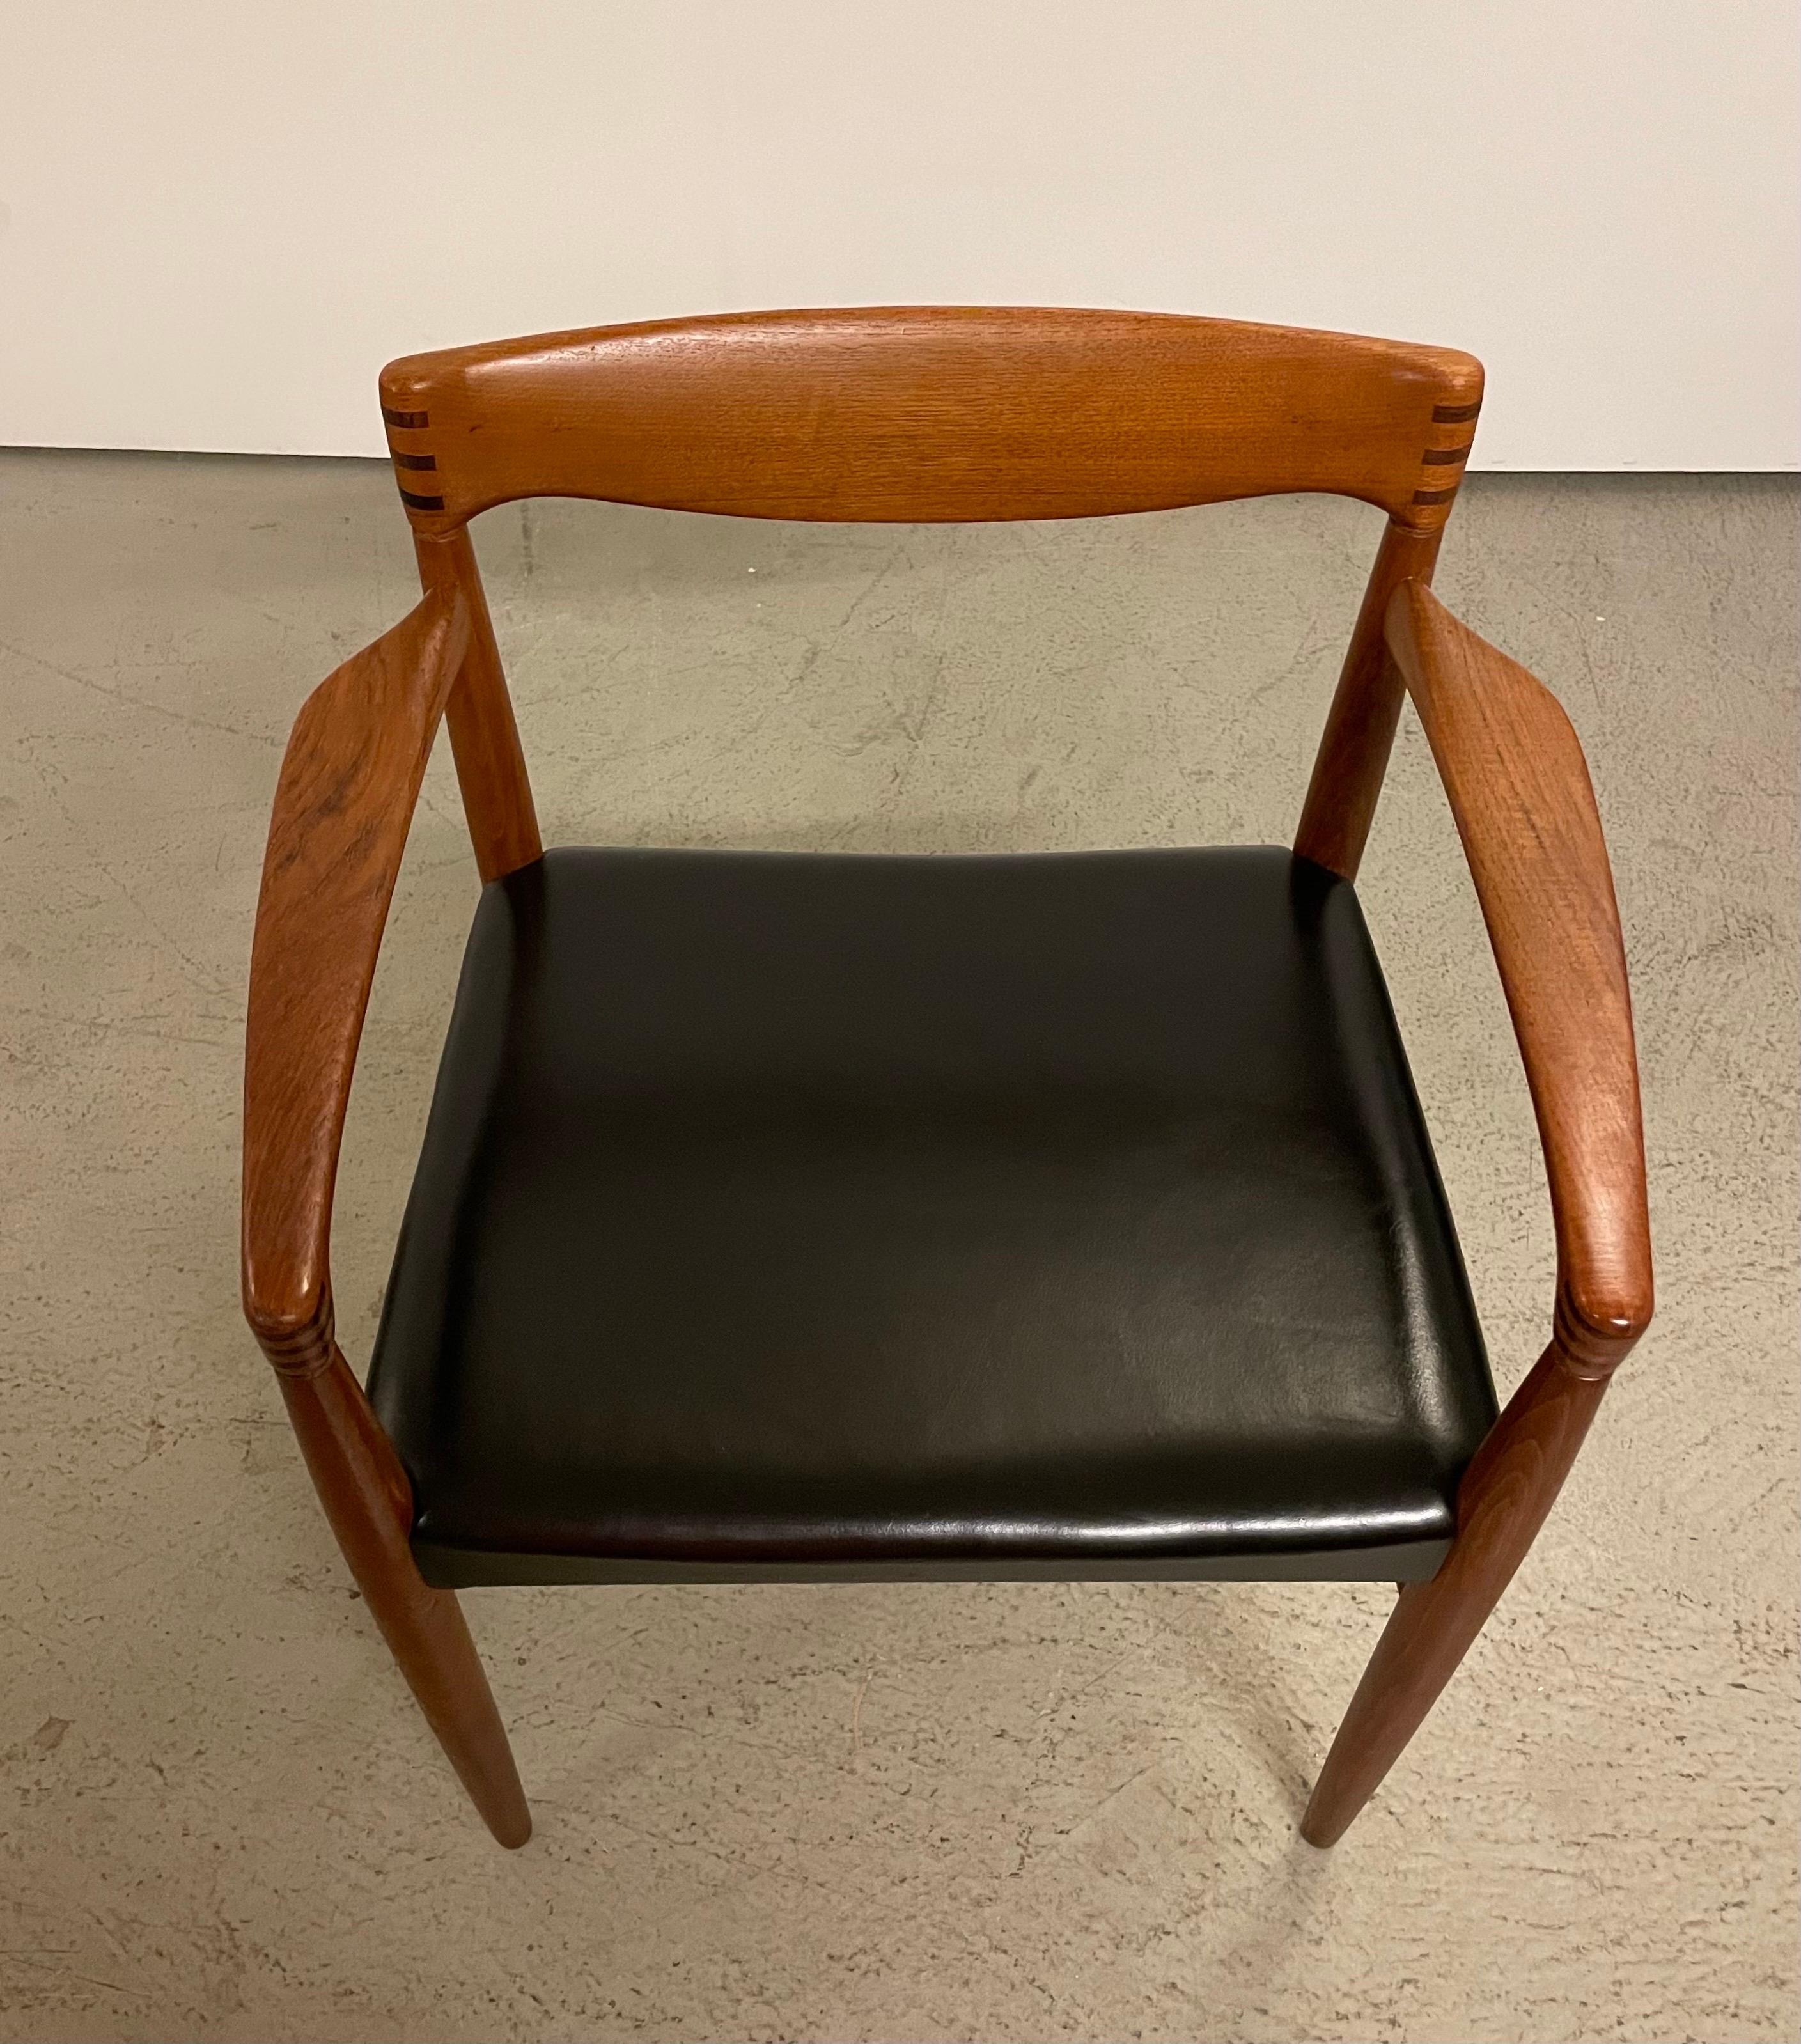 Rare set of teak wooden arm chairs from the 1950s designed by H.W. Klein. Made in Denamrk by Bramin Mobelfabrik. Features a solid teak frame with mortise and tenon backrest and armrests. The chairs are crafted with perfect proportions and attention